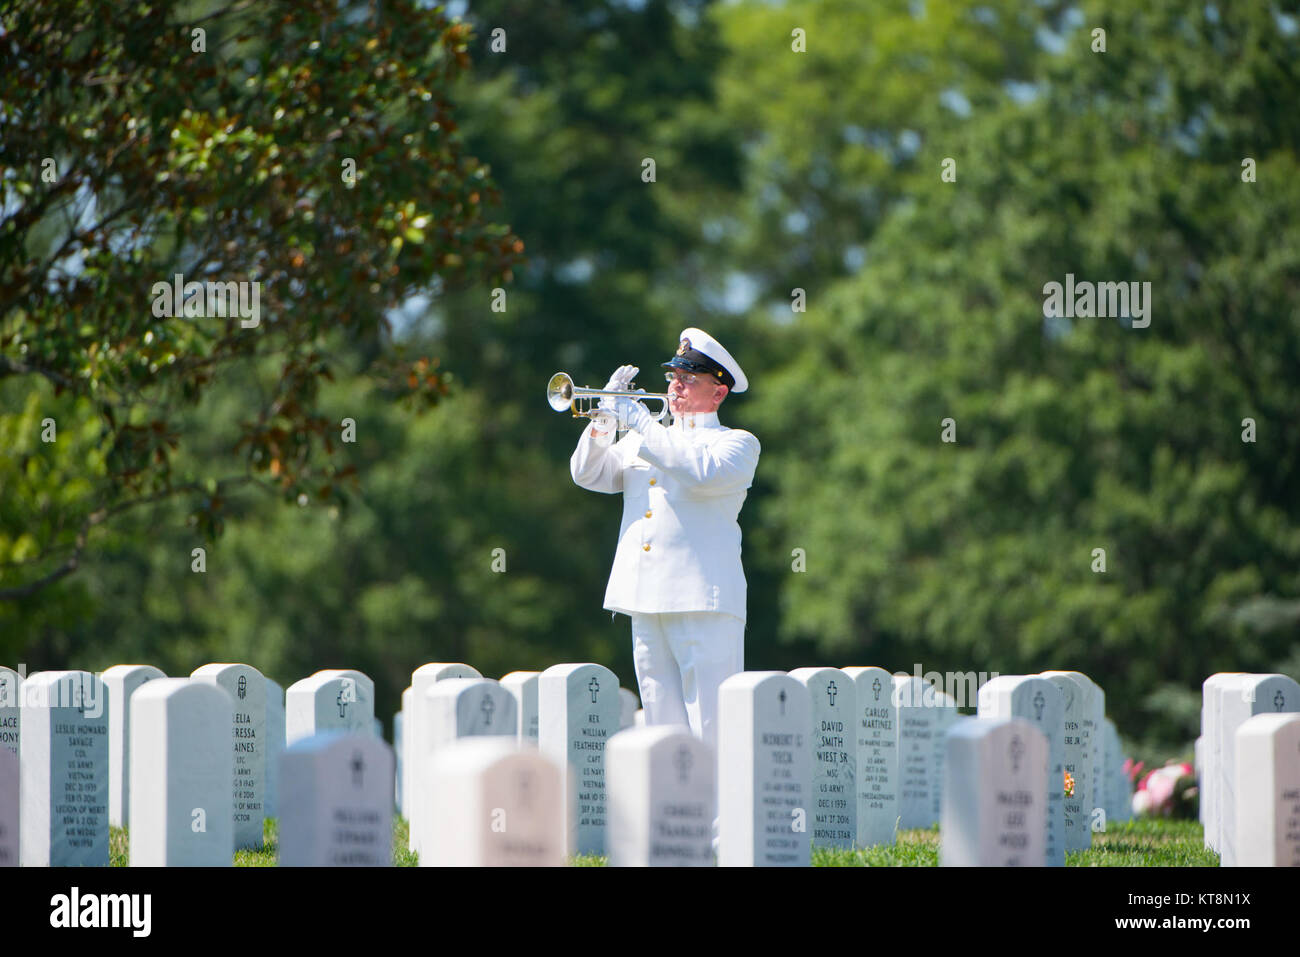 MU1 William Dunn, a bugler from the U.S. Navy Band, plays taps during the graveside service of U.S. Navy Petty Officer 1st Class Xavier A. Martin at Arlington National Cemetery, Arlington, Va., Aug. 9, 2017. Martin perished when the USS Fitzgerald (DDG 62) was involved in a collision with the Philippine-flagged merchant vessel ACX Crystal, flooding the berthing compartment he was occupying. Martin was buried with standard honors in Section 60. (U.S. Army photo by Elizabeth Fraser / Arlington National Cemetery / released) Stock Photo